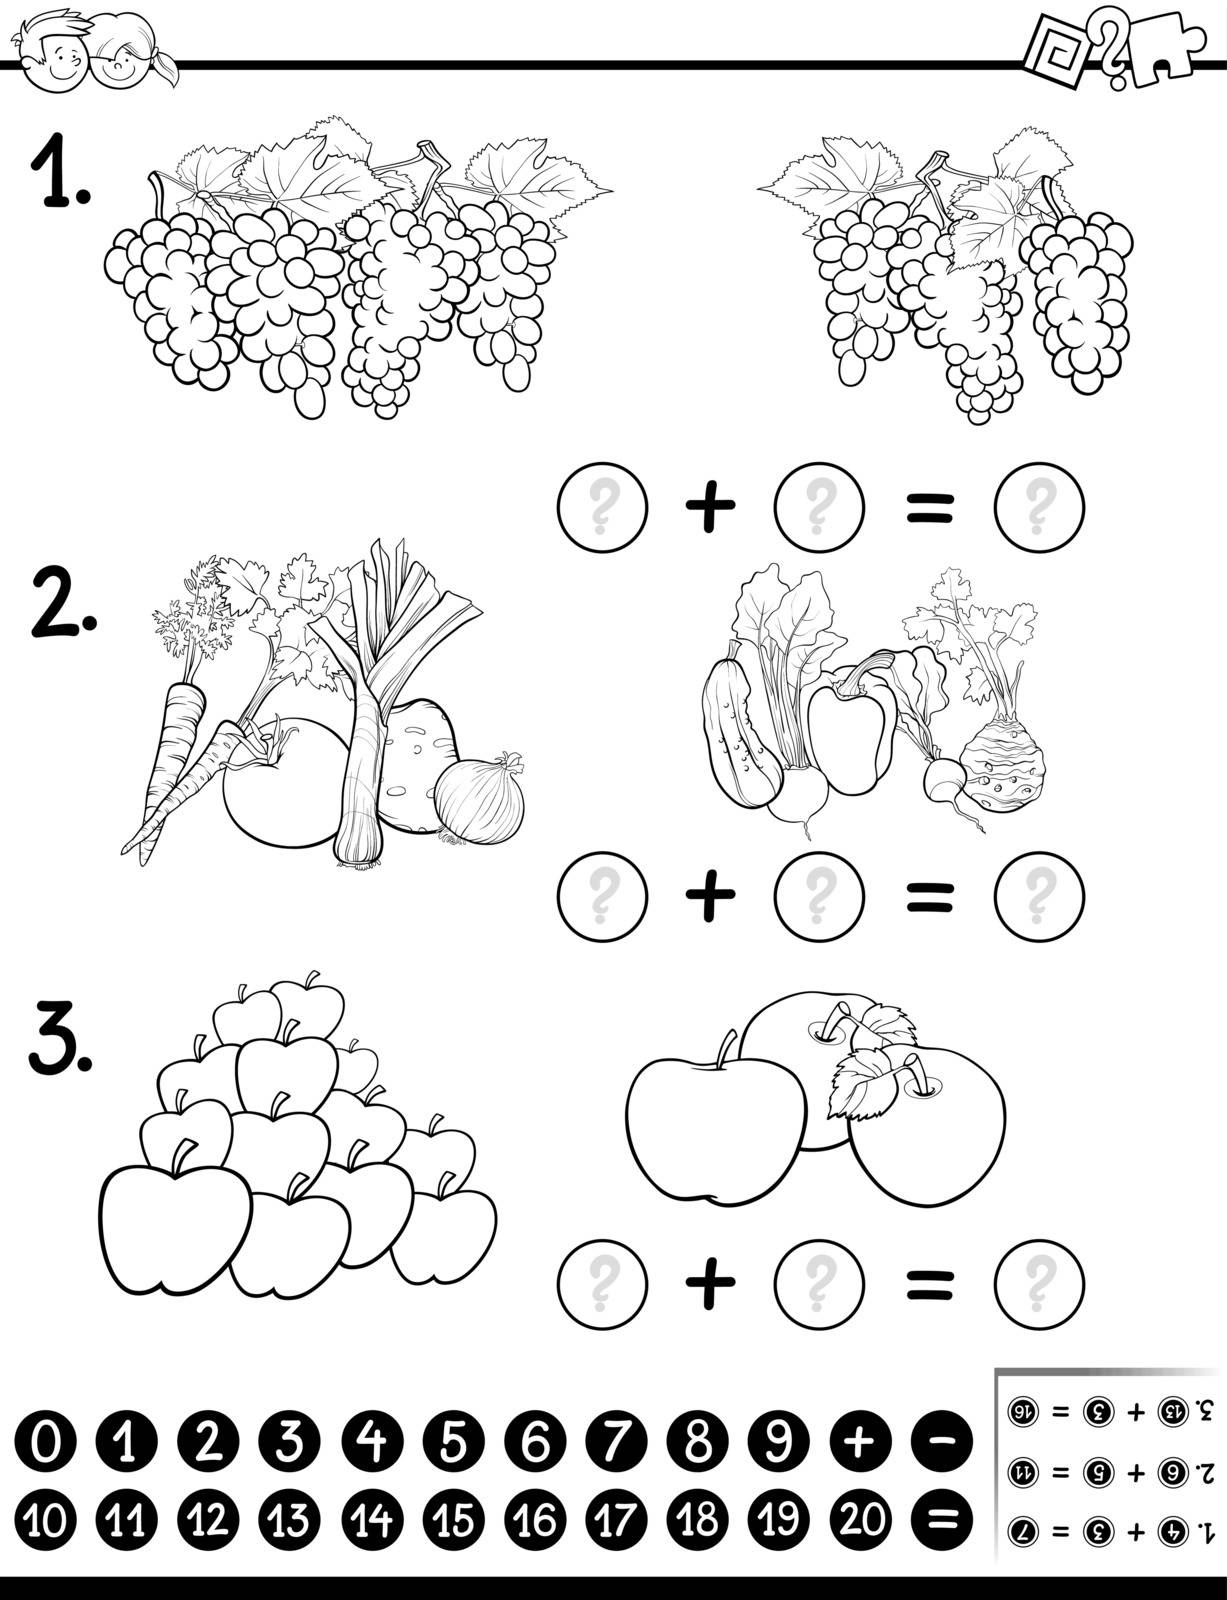 Black and White Cartoon Illustration of Educational Mathematical Activity Game for Children with Fruits and Vegetables Coloring Page